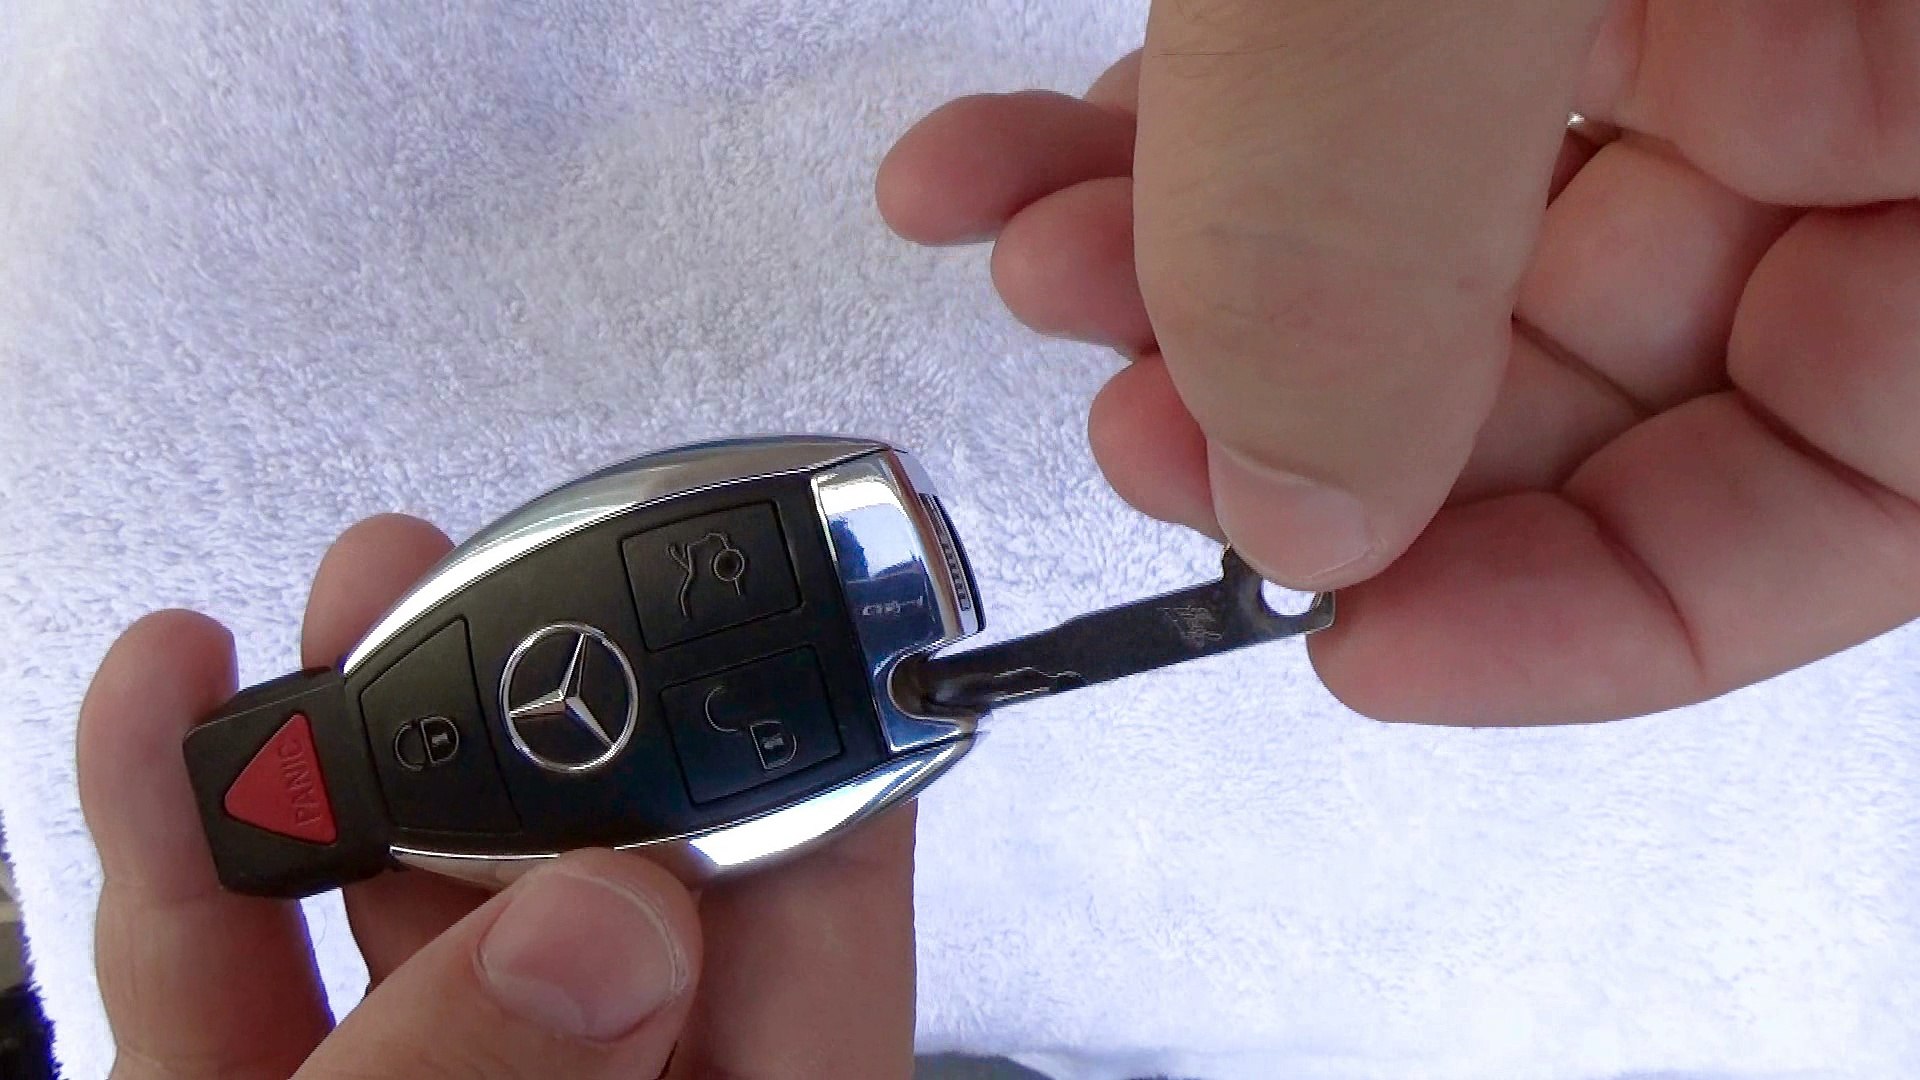 How to Change Your Mercedes-Benz Key Battery